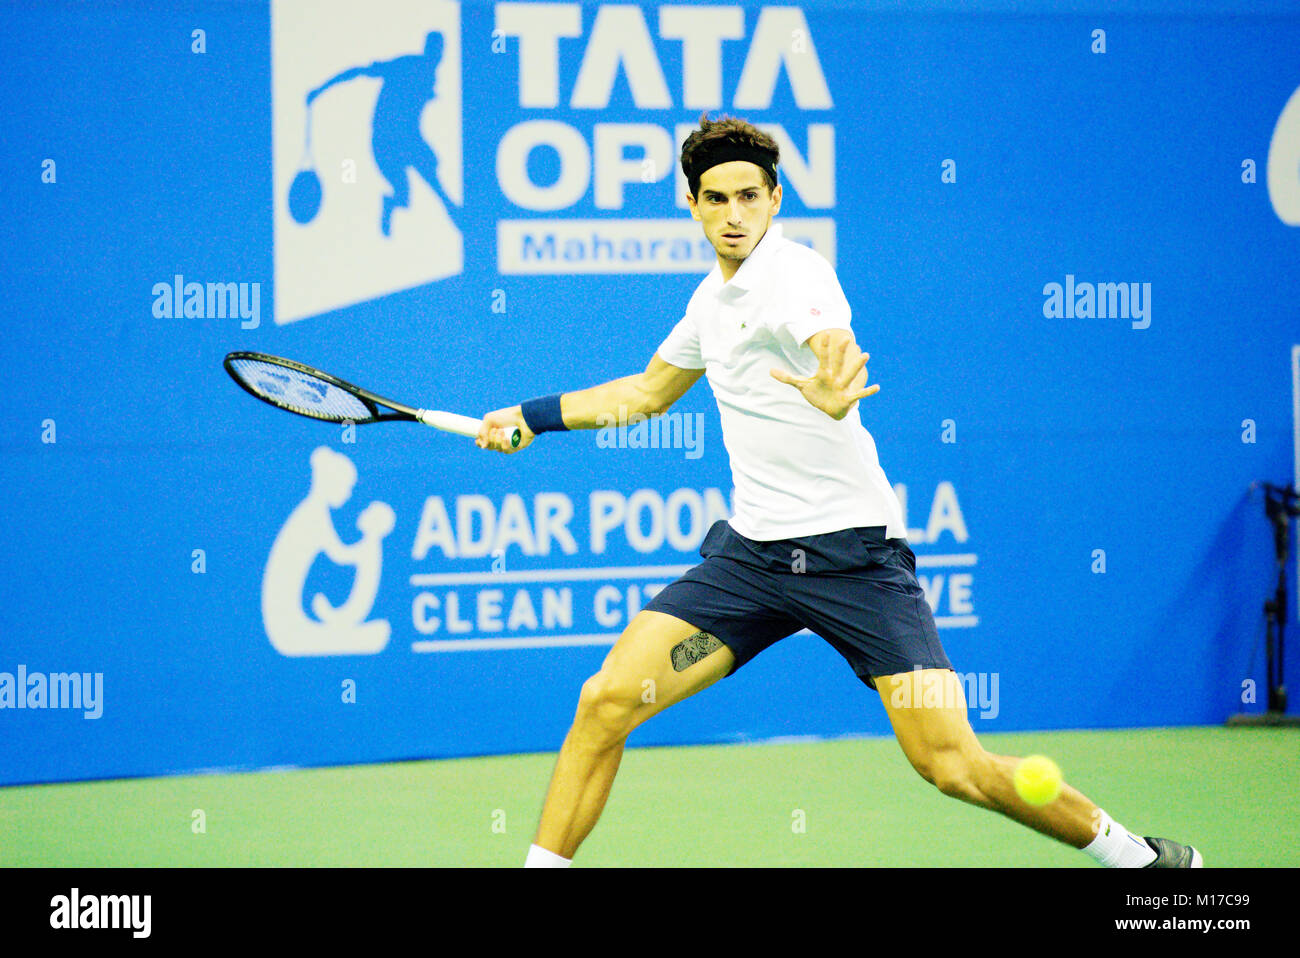 Pune, India. 4th January 2018. Pierre-Hugues Herbert of France, in action in a quarter-final match of Tata Open Maharashtra Tennis tournament. Stock Photo